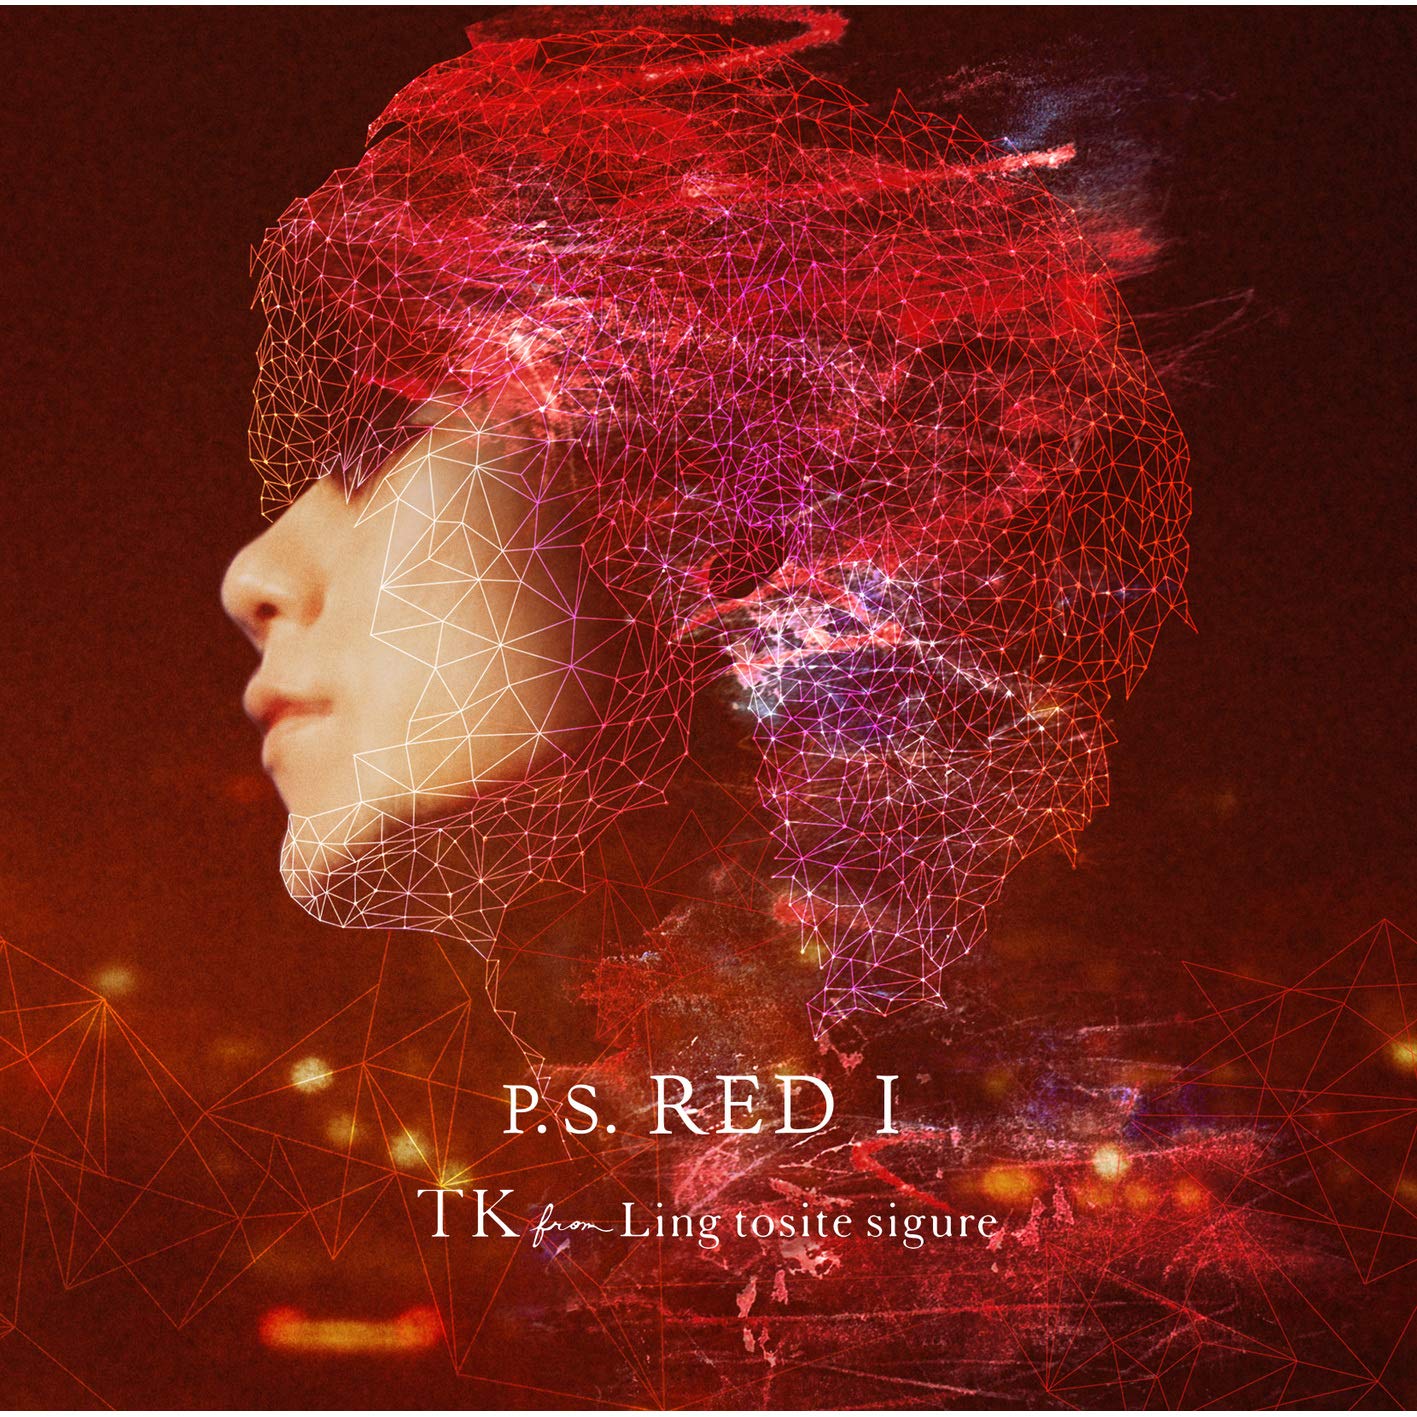 TK from 凛として時雨 (TK from Ling tosite Sigure) – P.S. RED I [FLAC + MP3 320 / WEB] [2019.03.06]